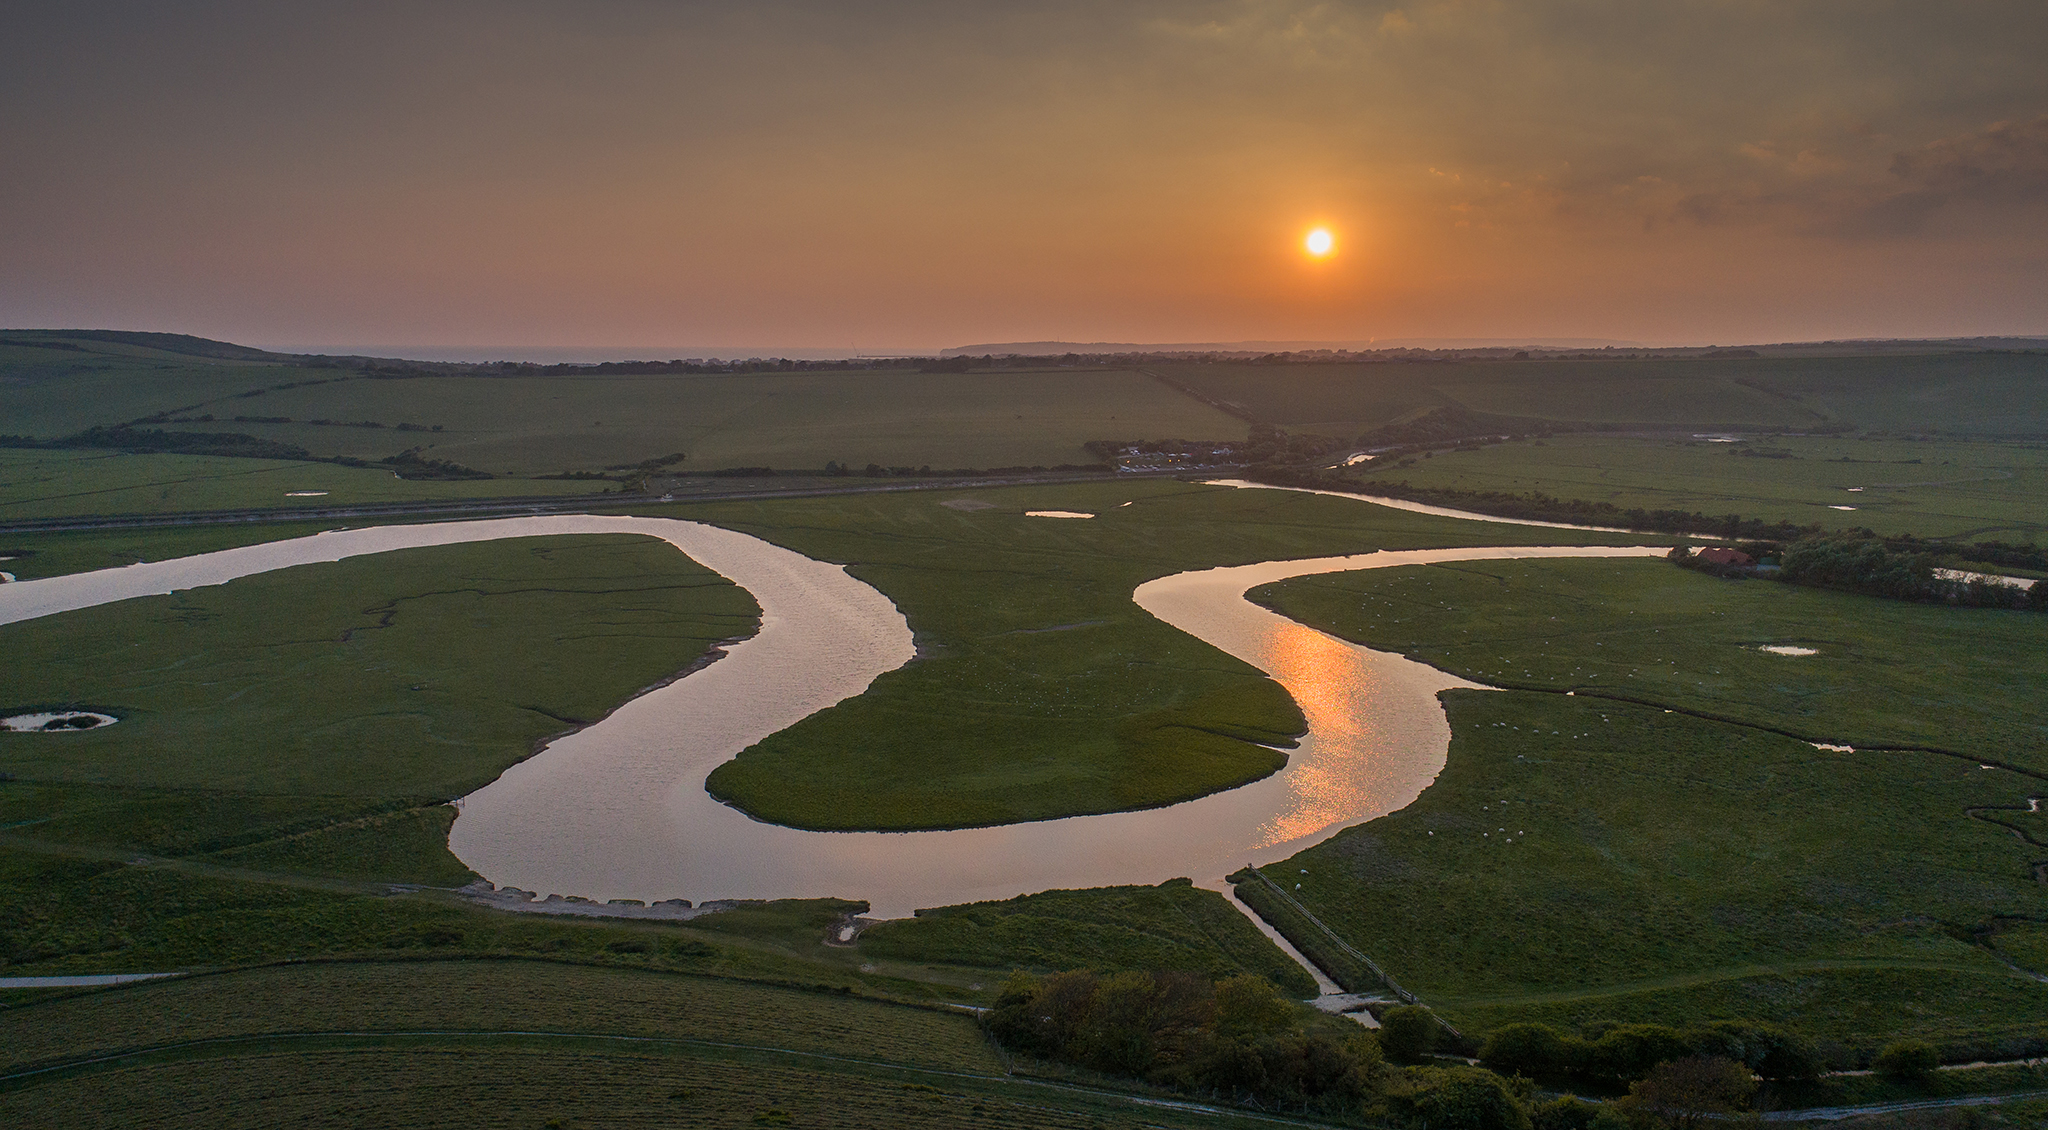 Cuckmere River, Seven Sisters Country Park, East Sussex, England